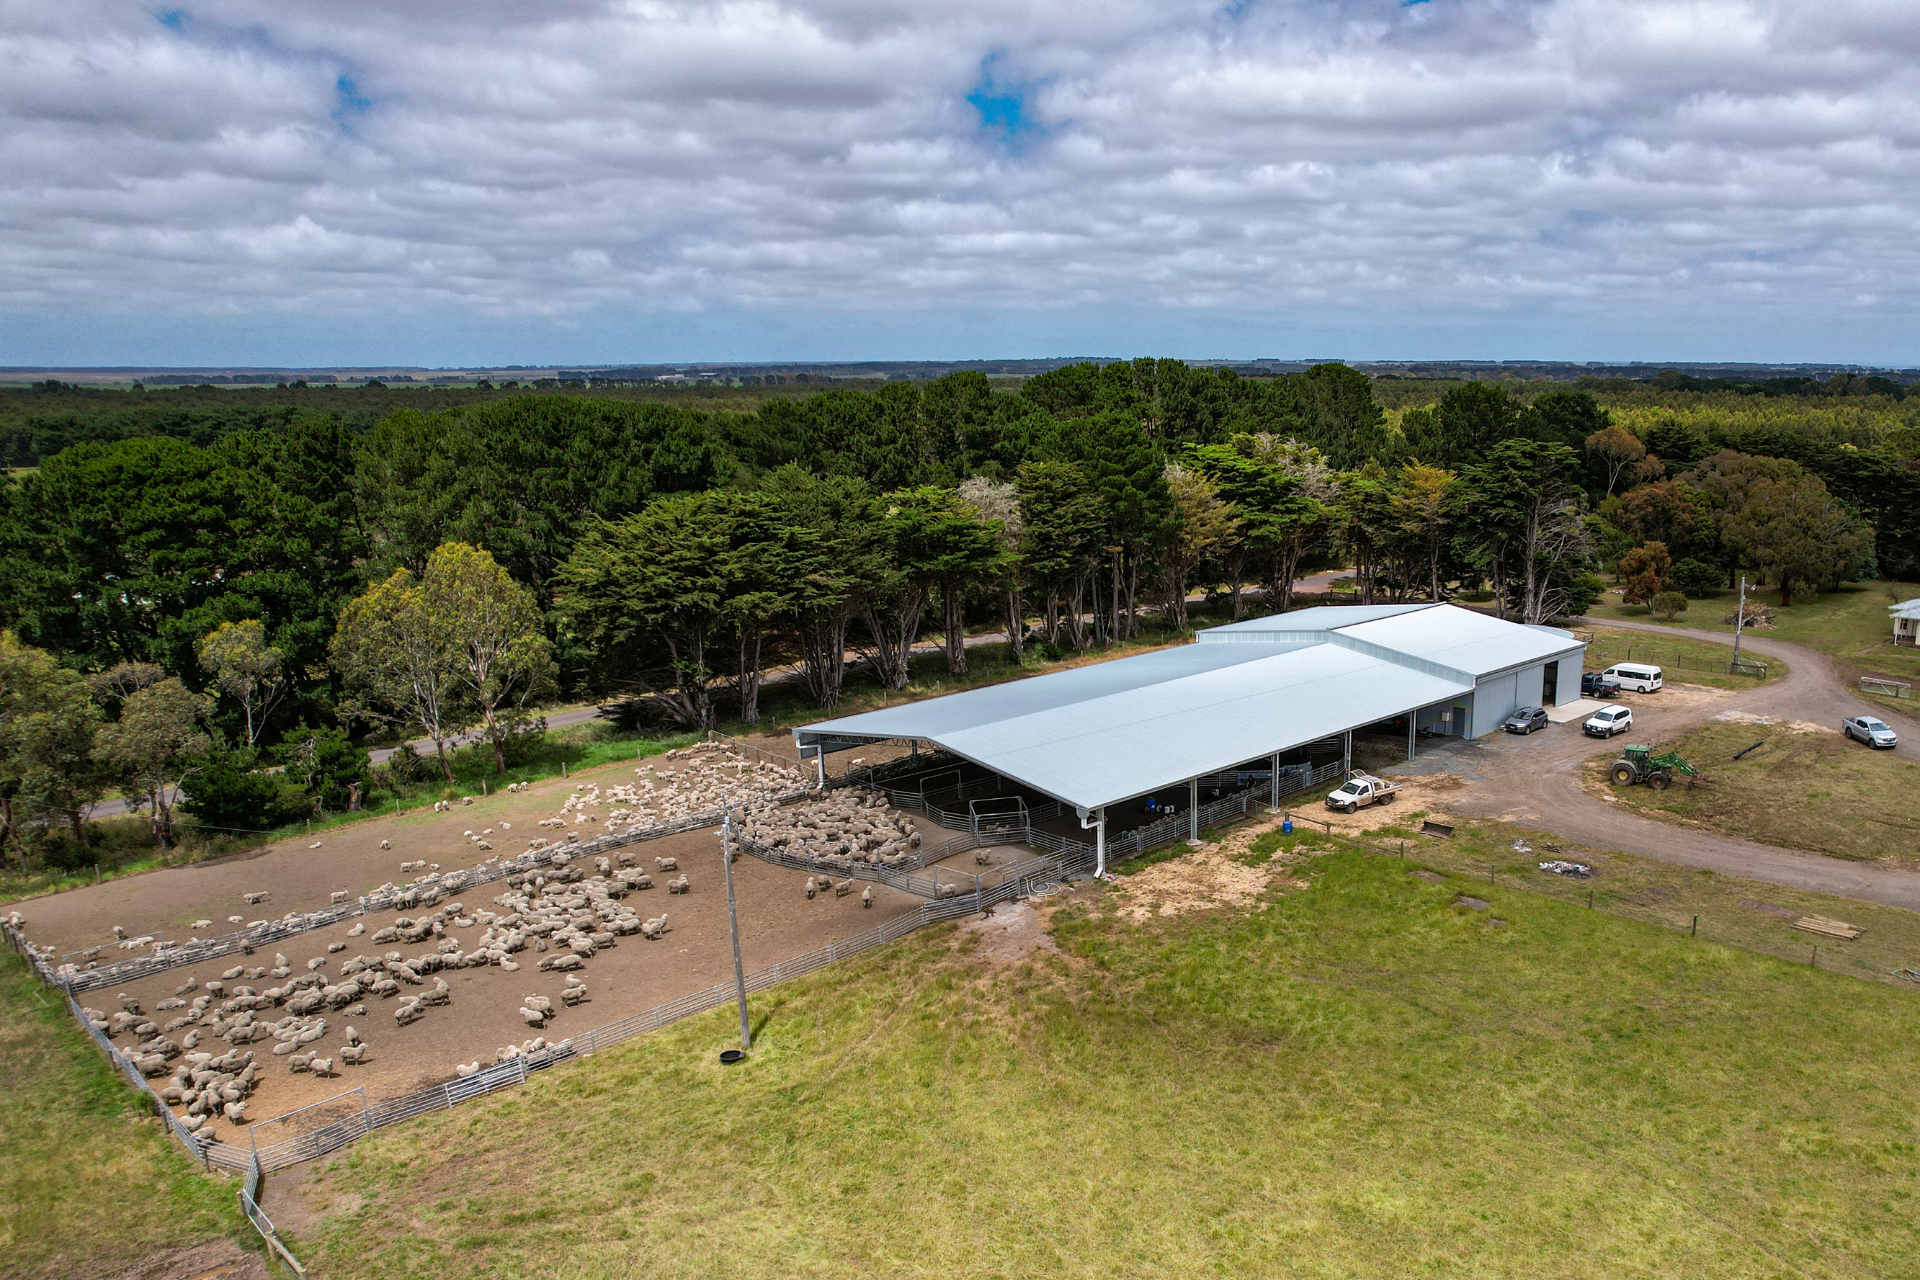 A 60m x 27m x 5.2m shearing shed complex at Hawkesdake VIC